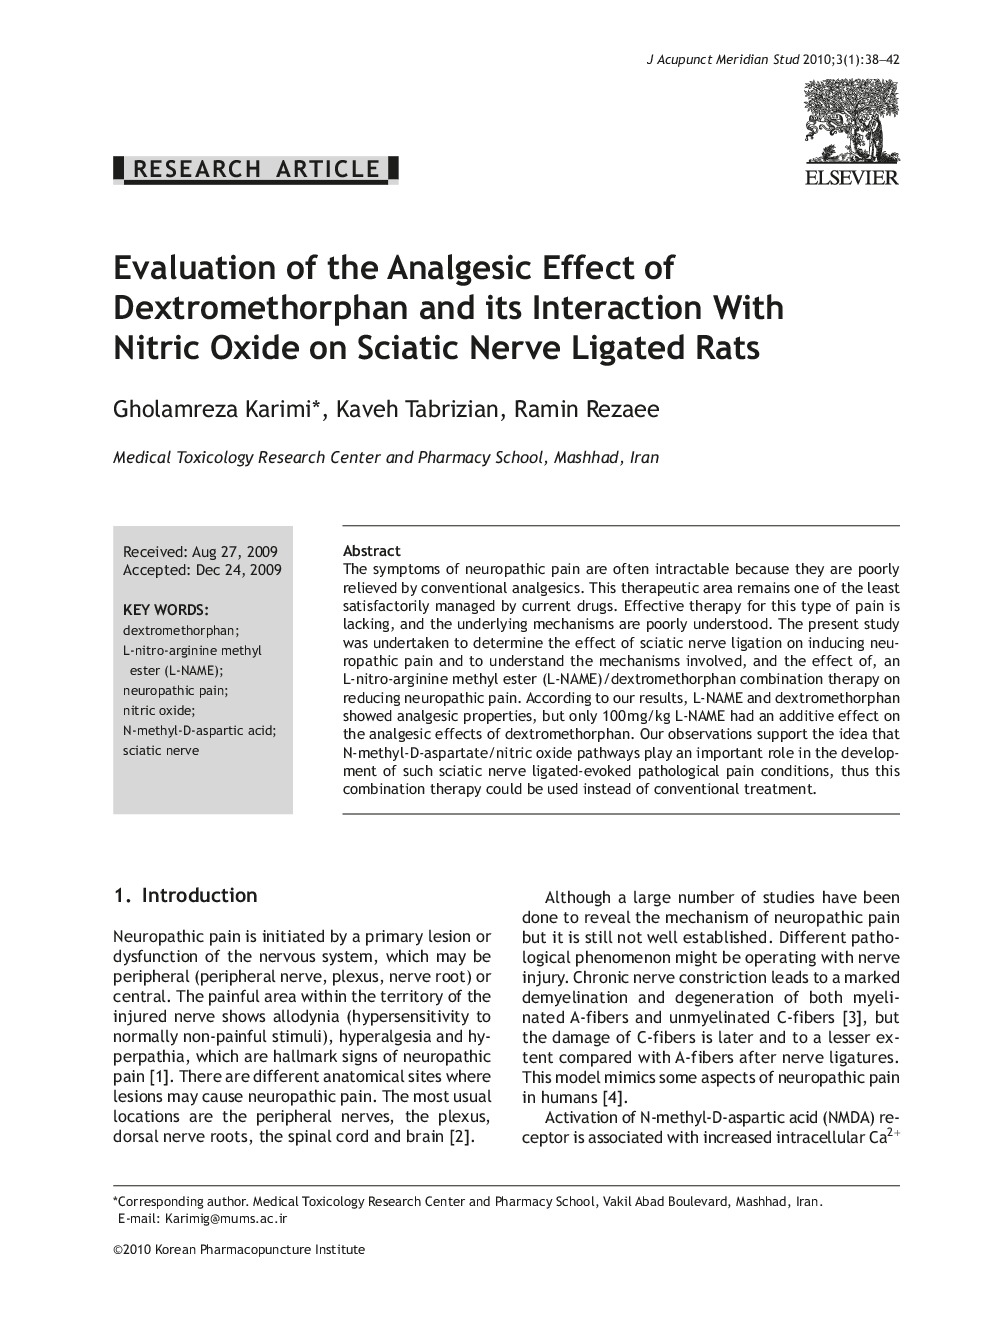 Evaluation of the Analgesic Effect of Dextromethorphan and its Interaction With Nitric Oxide on Sciatic Nerve Ligated Rats